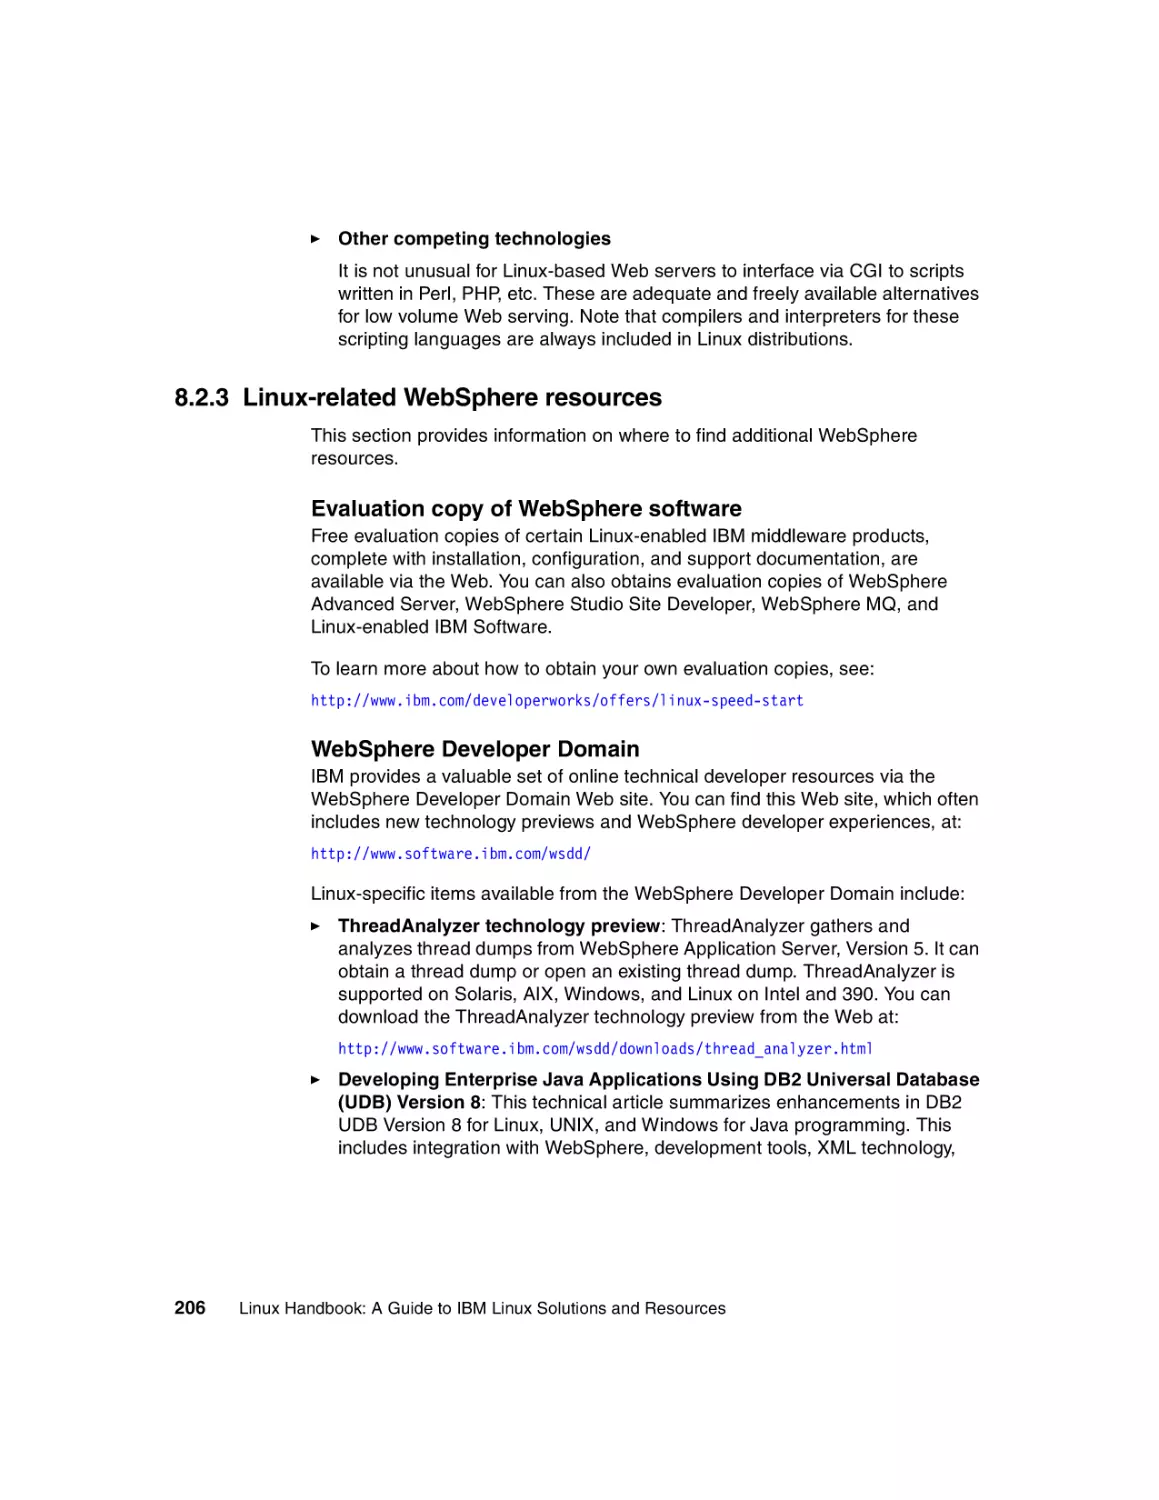 8.2.3 Linux-related WebSphere resources